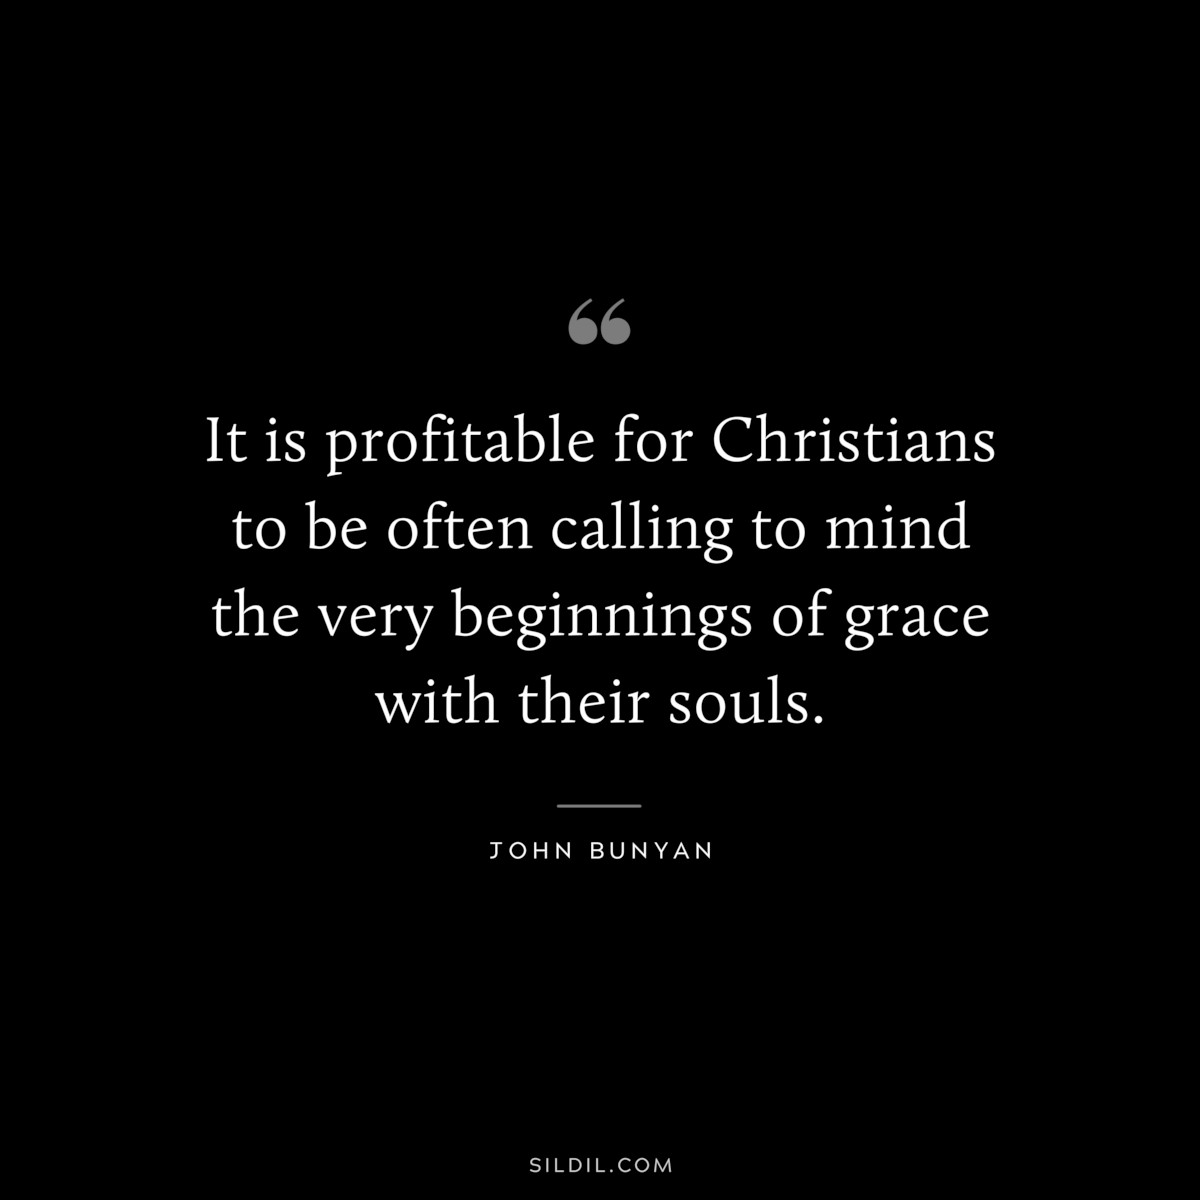 It is profitable for Christians to be often calling to mind the very beginnings of grace with their souls. ― John Bunyan